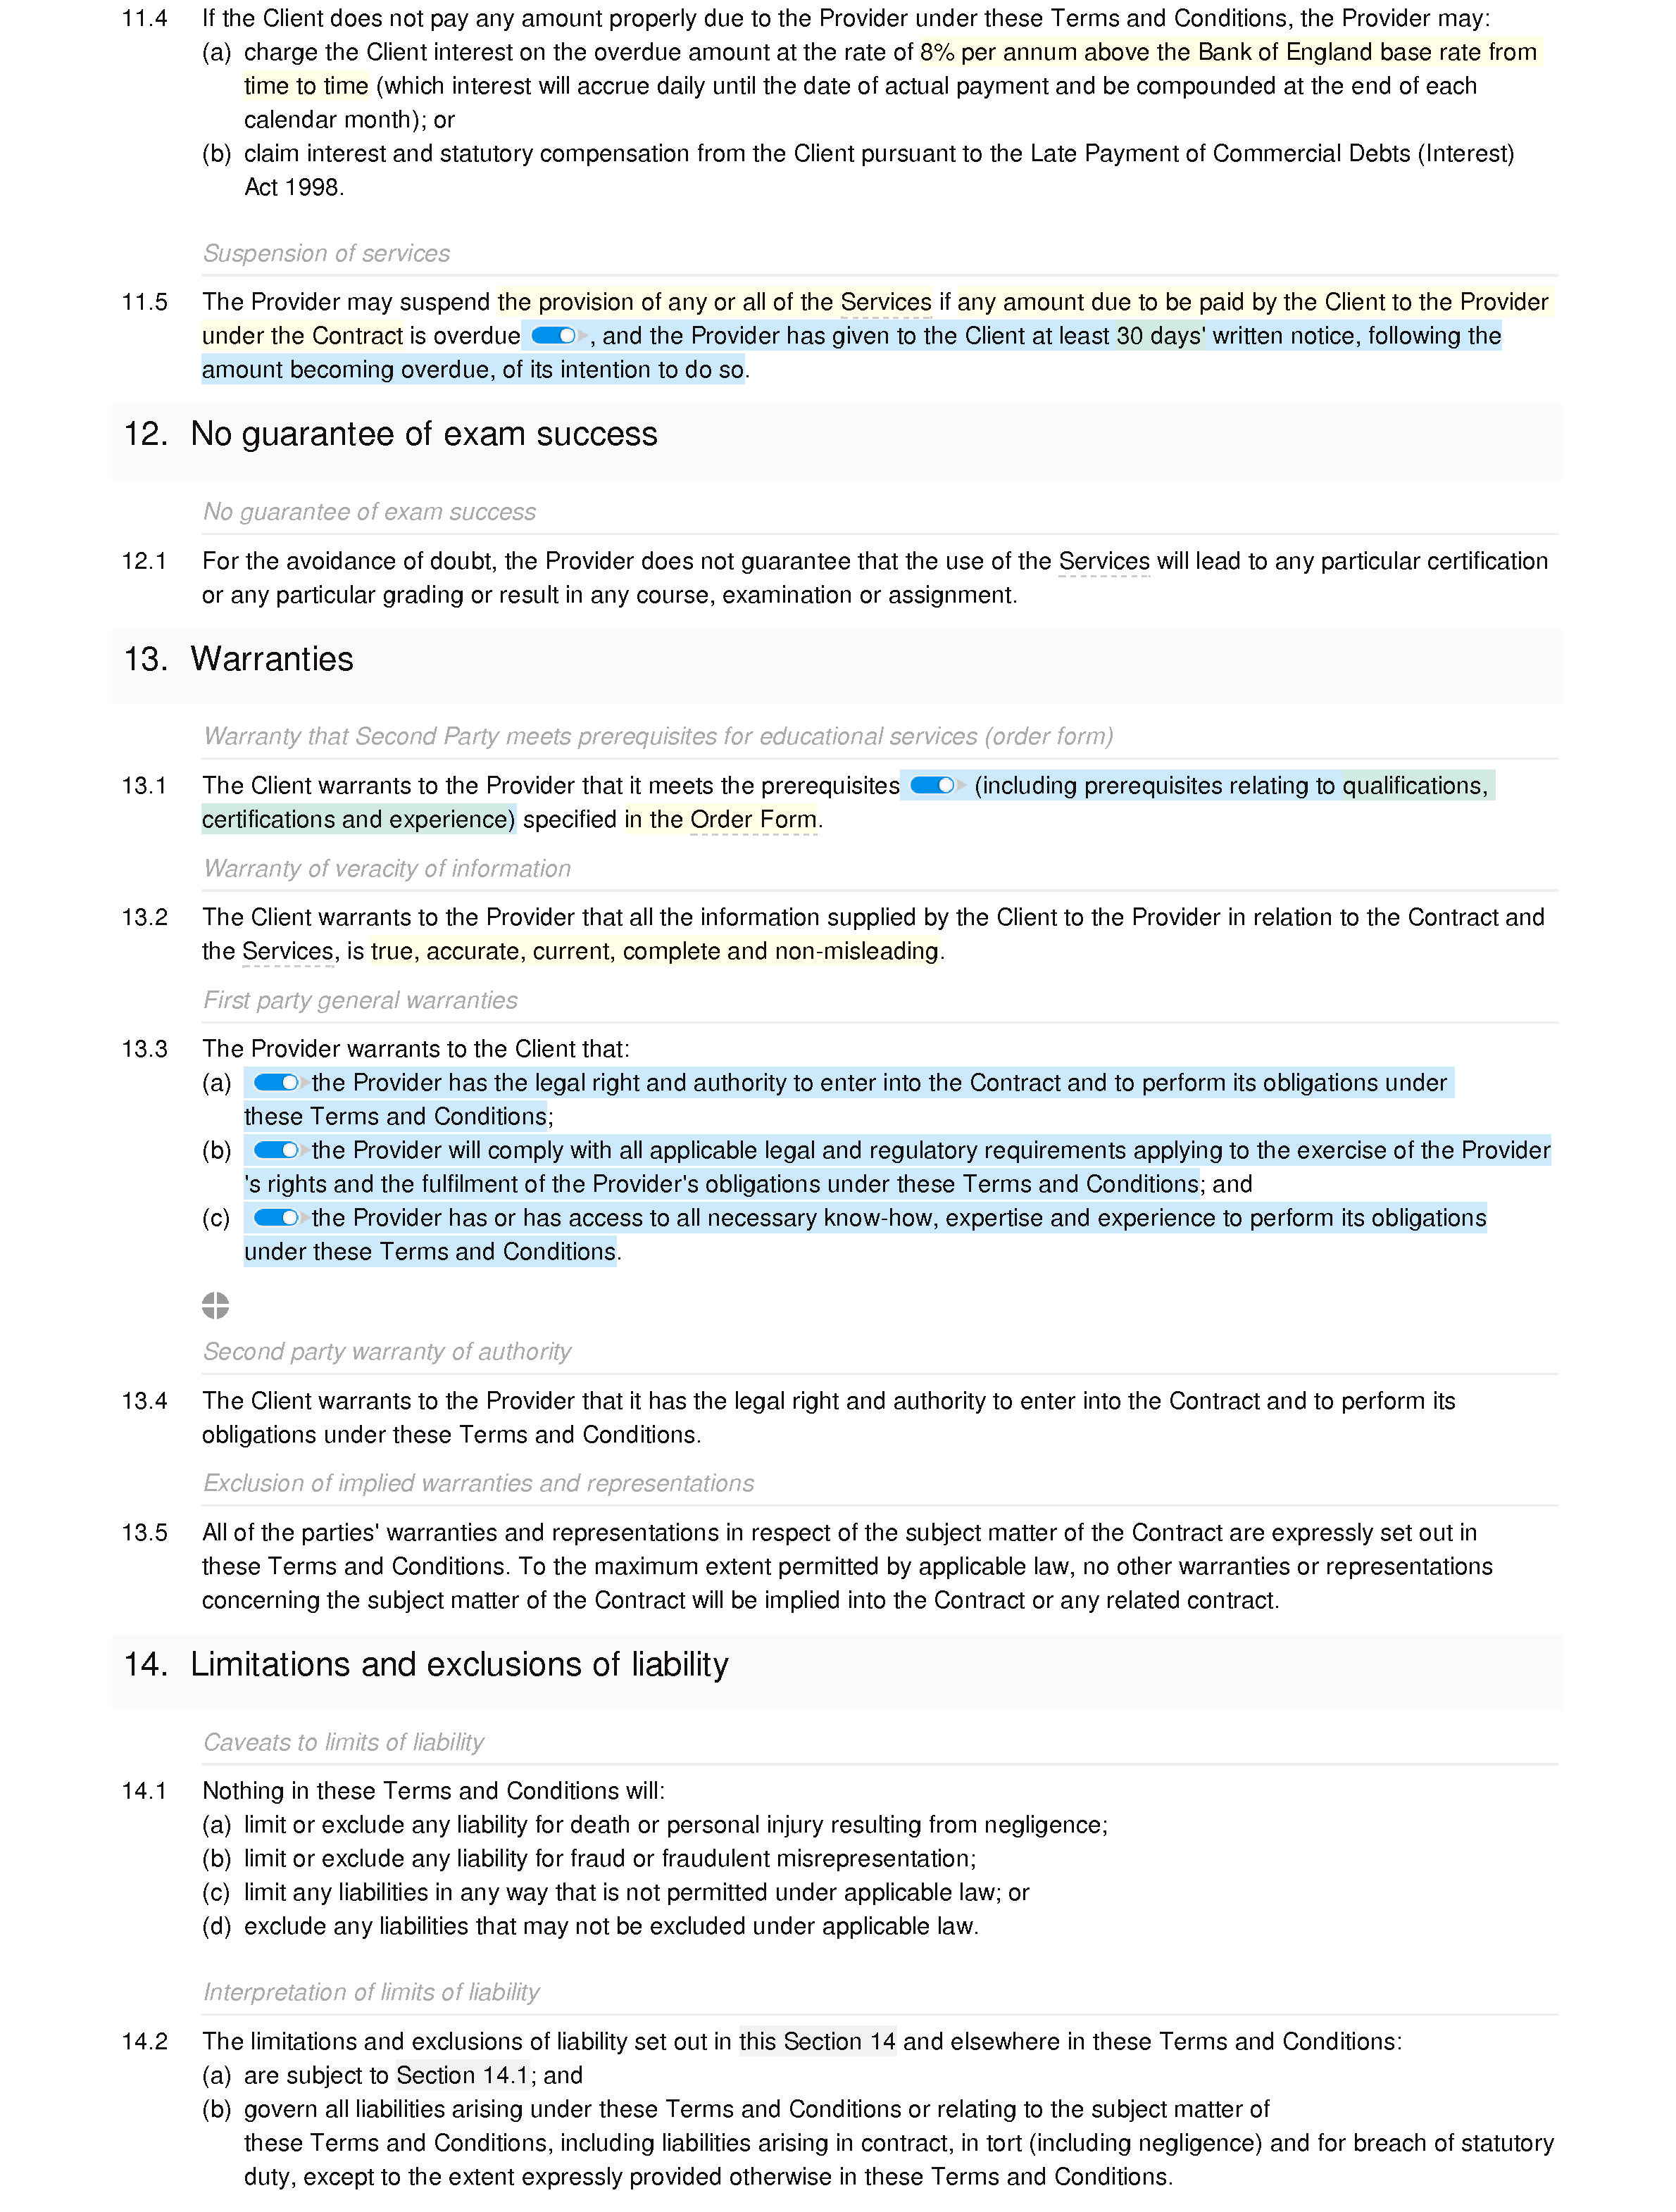 Online education and training terms and conditions (B2B) document editor preview